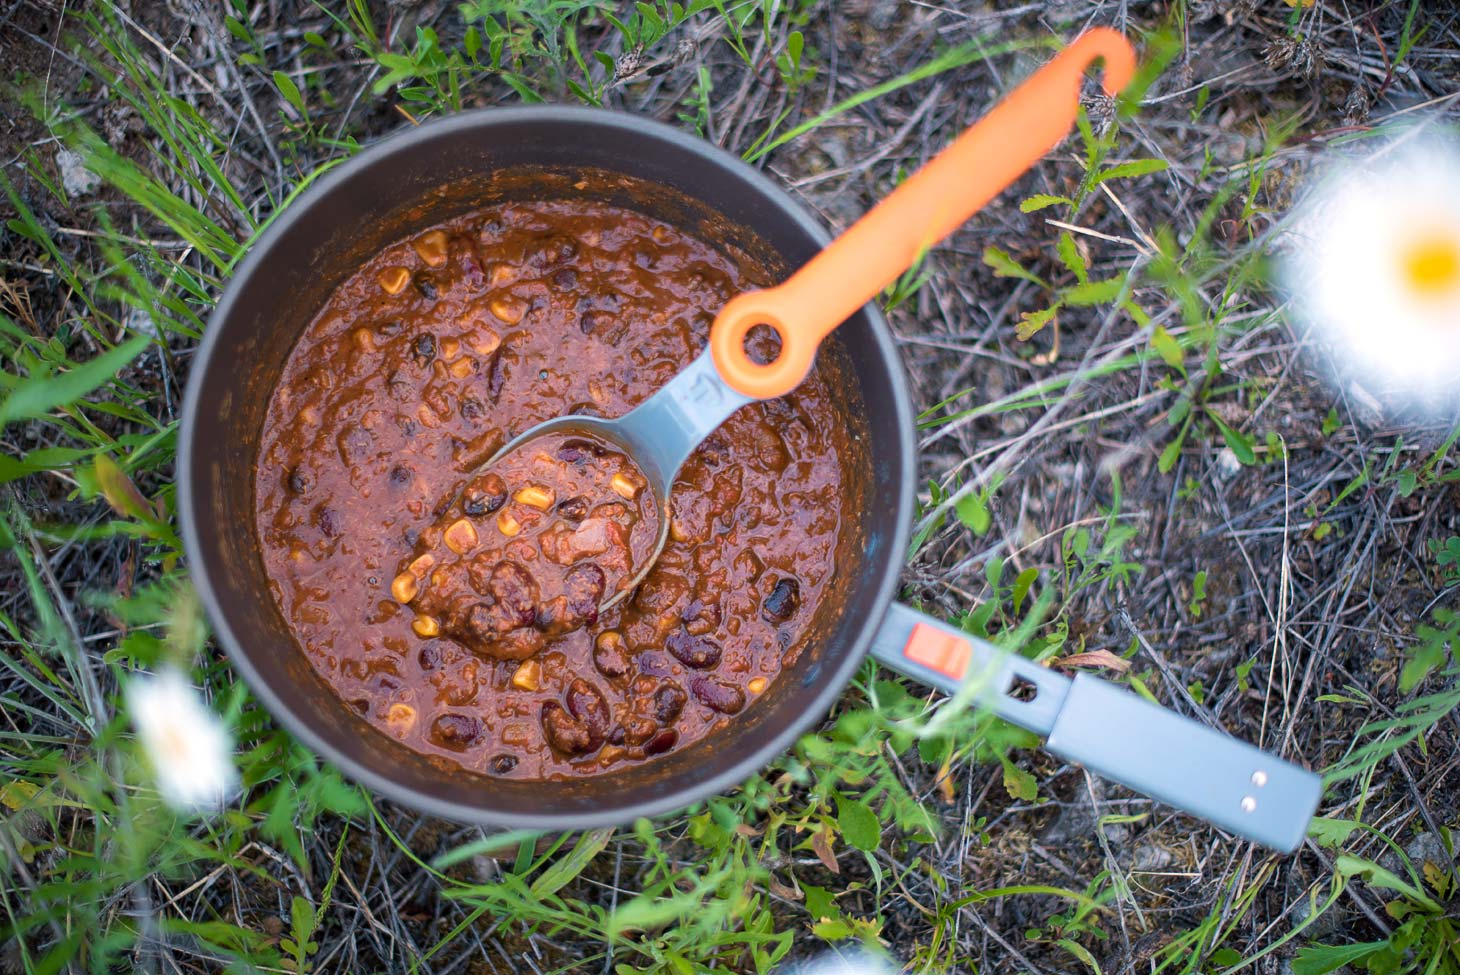 A backpacking pot filled with quinoa chili sitting on a grassy surface